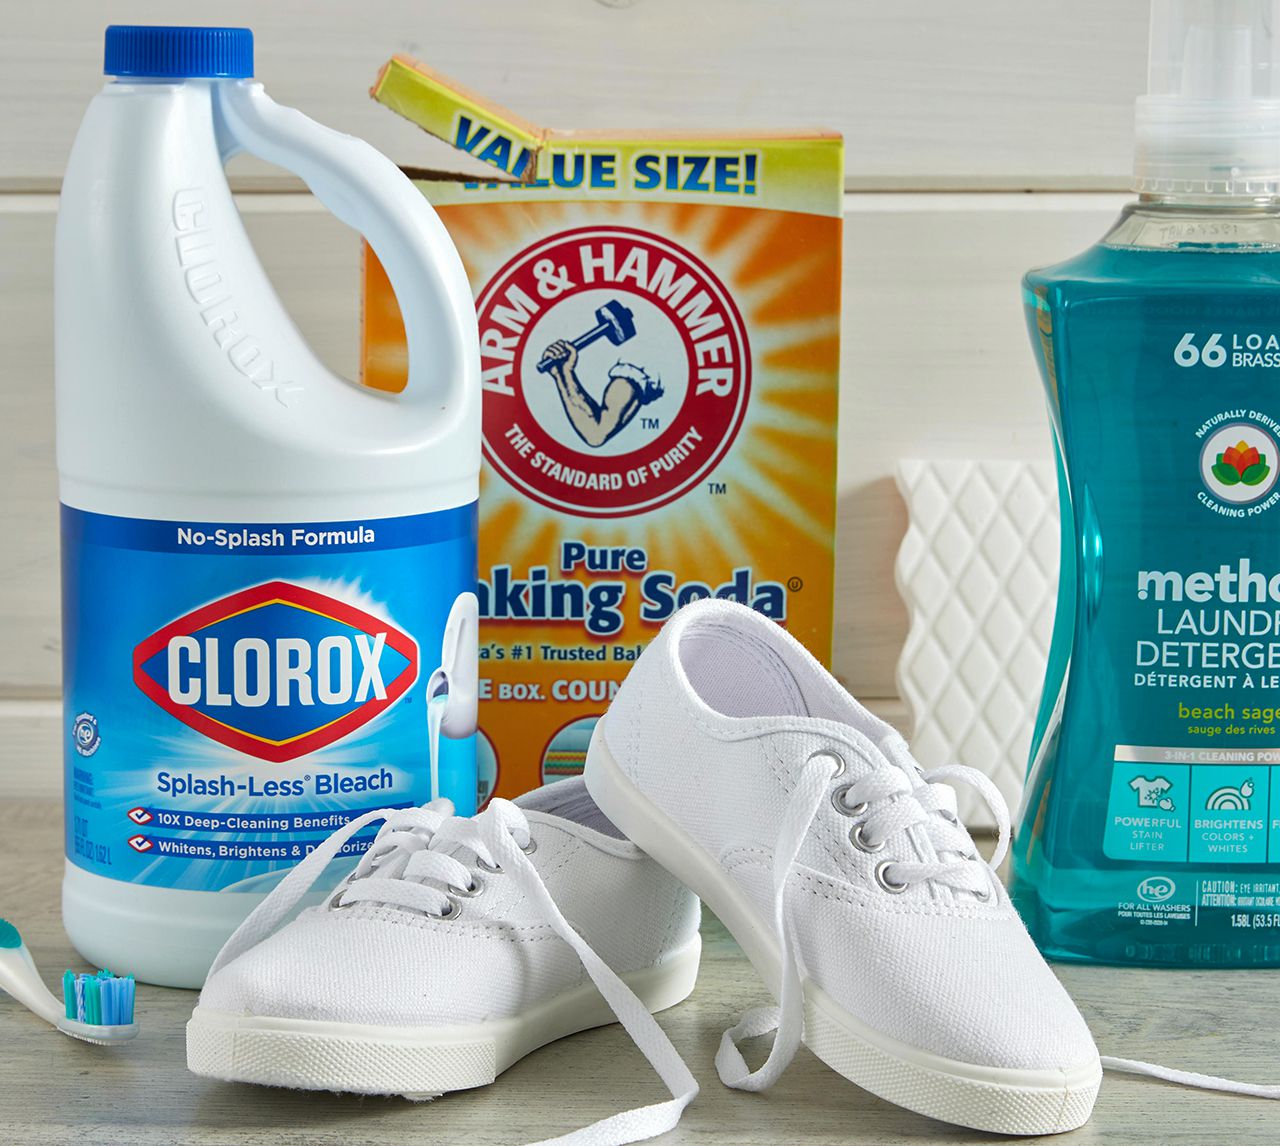 What is the Best Thing to Use to Clean Shoes